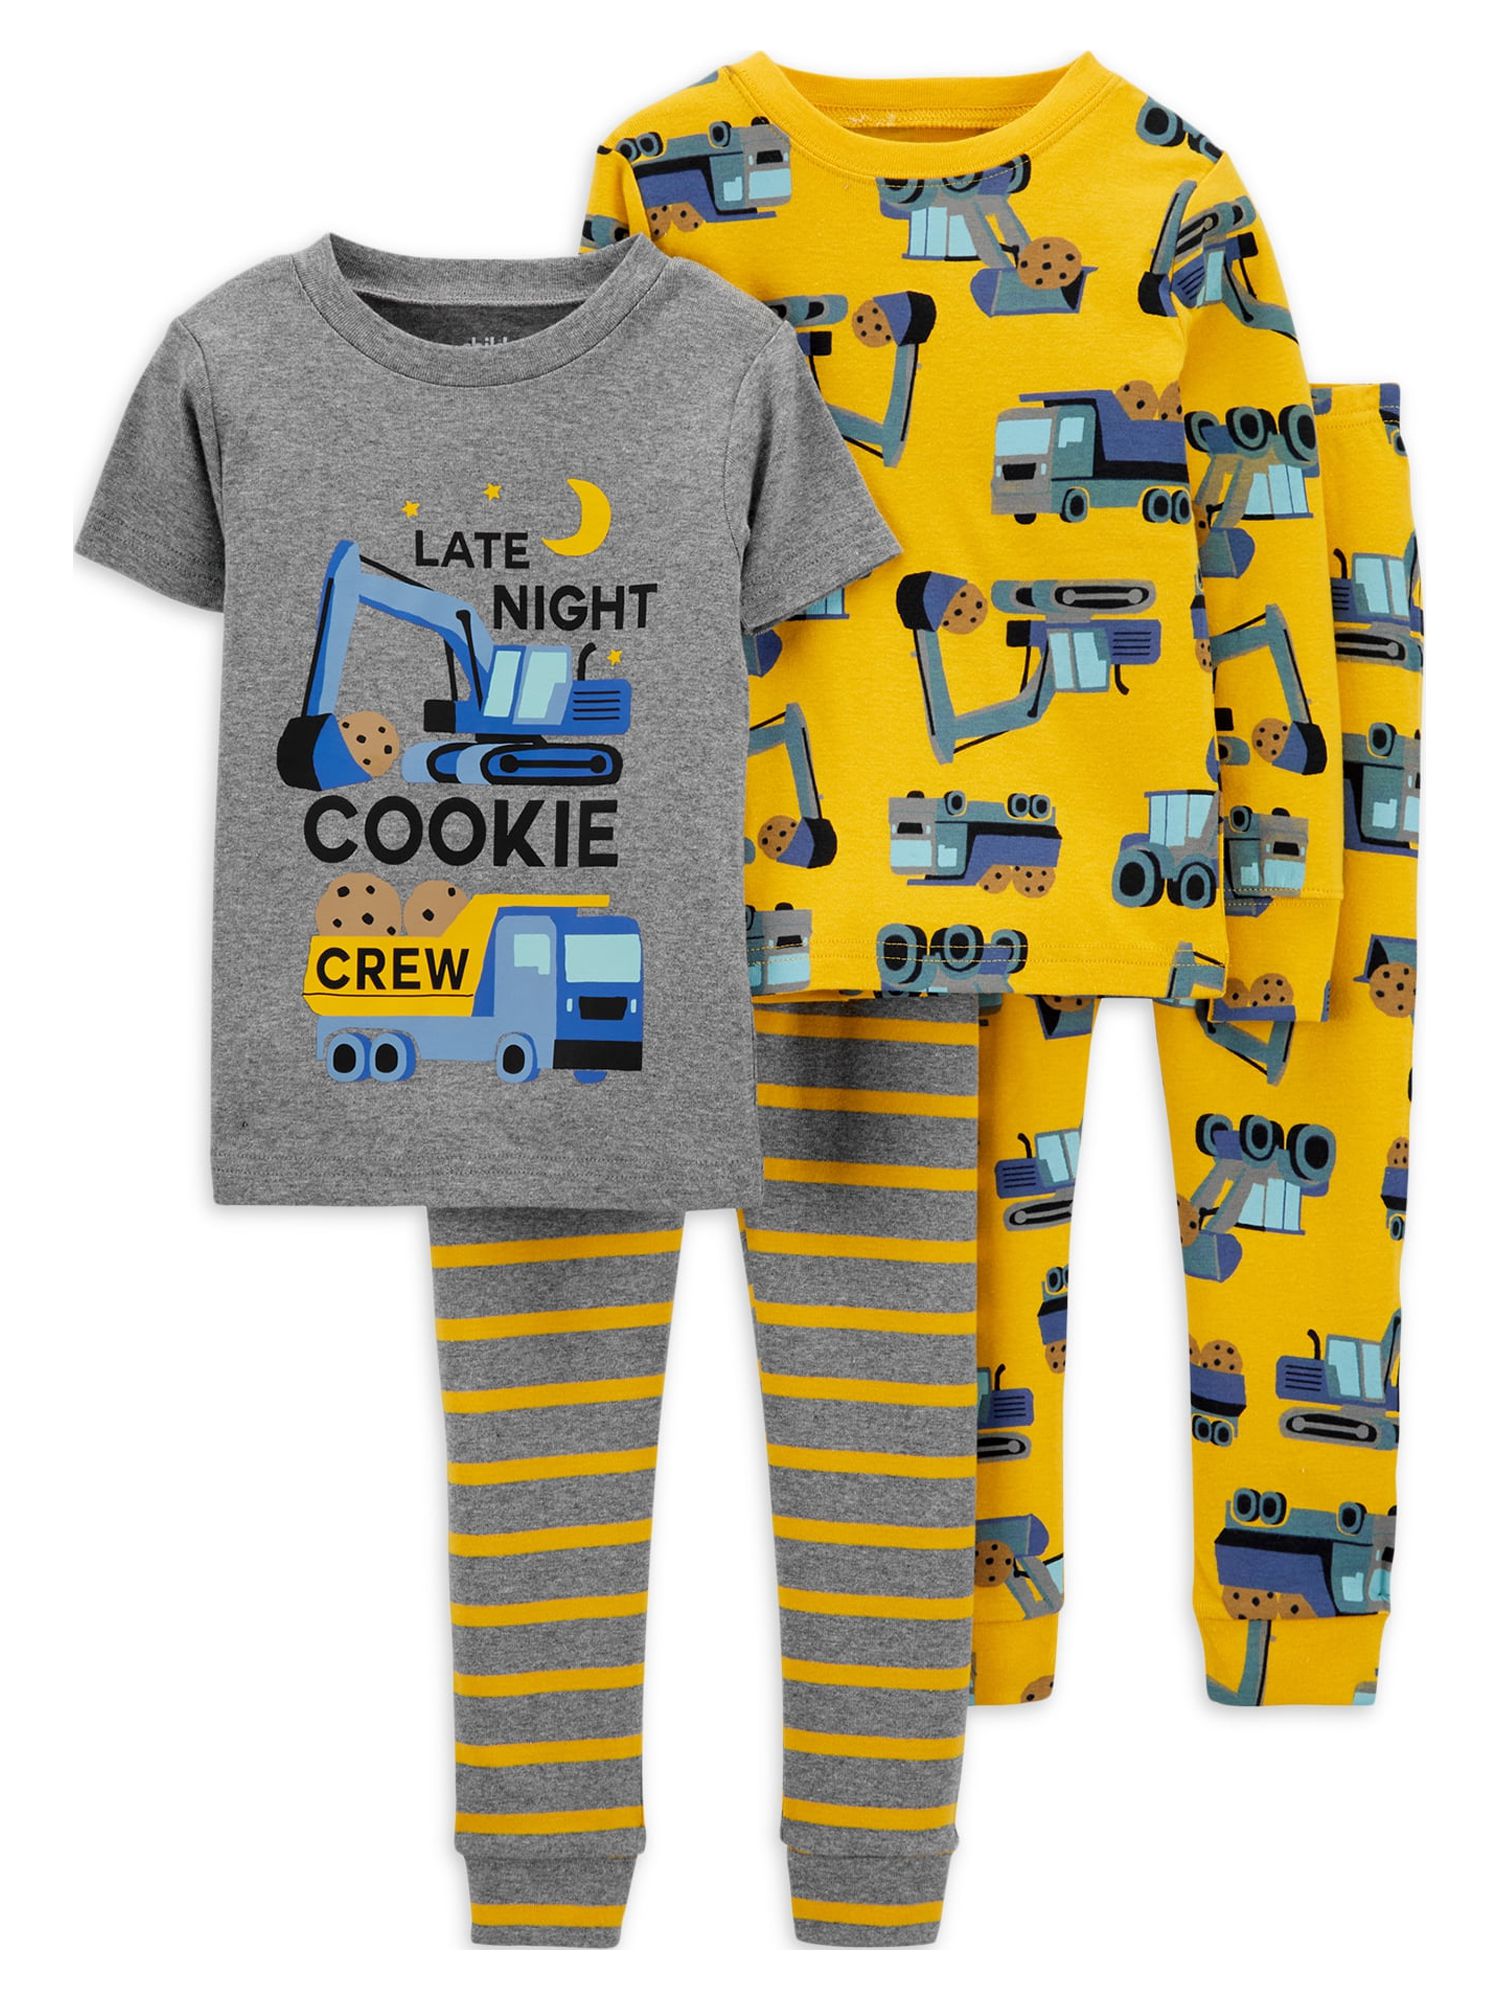 Carter's Child of Mine Baby and Toddler Boy Pajama Set, 4-Piece, Sizes 12M-5T - image 1 of 3